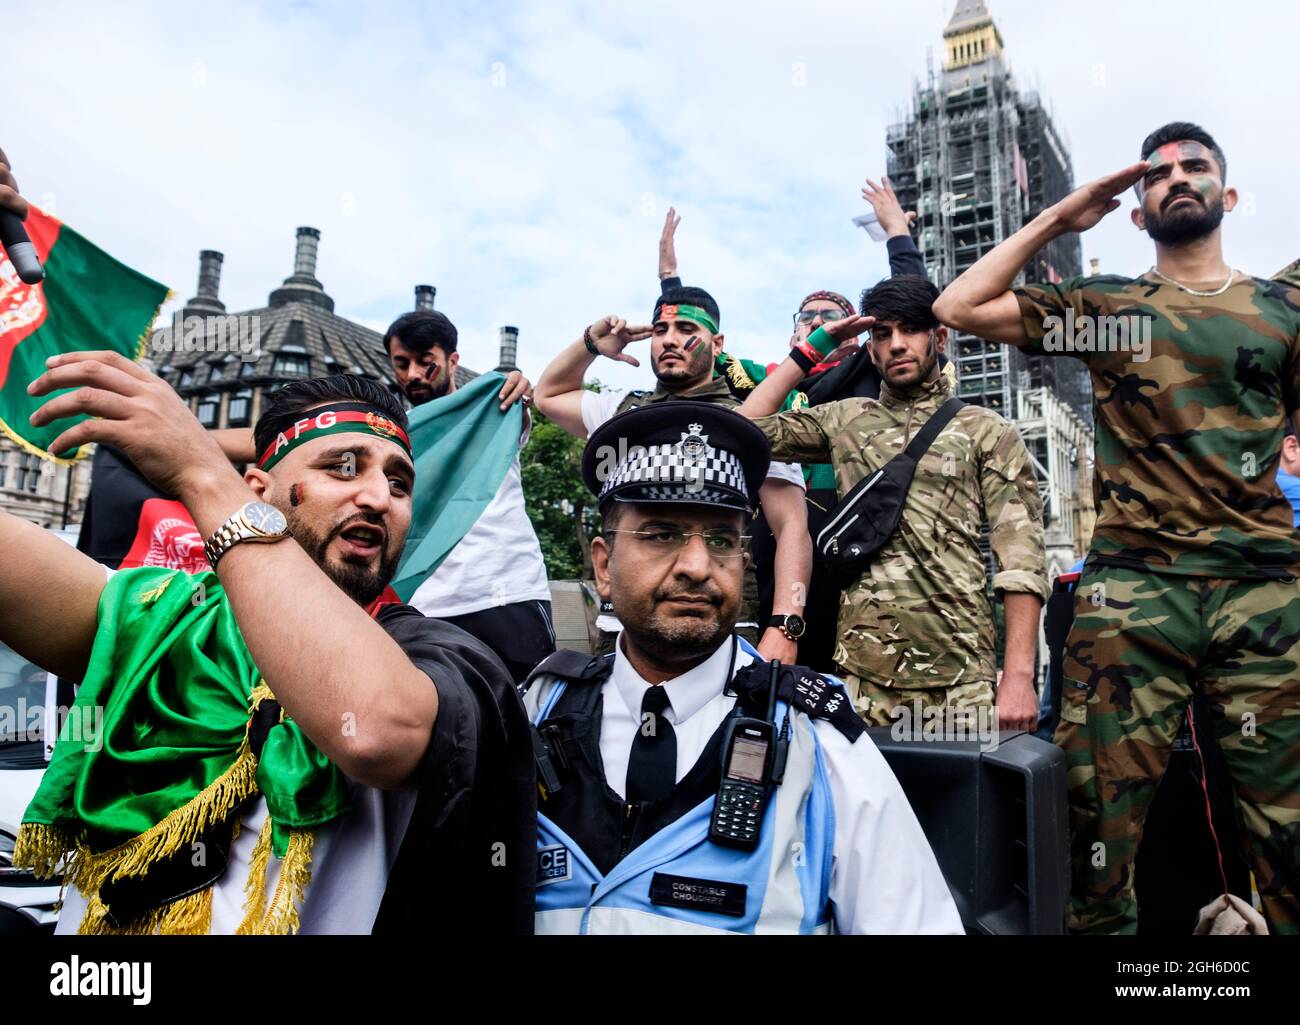 Anti-Taliban Afghans marched through London  betrayed by the US and UK withdrawal from Afghanistan. leaving the Taliban in charge.   End to the proxy war, stop to the killings and sanction Pakistan. 28.08.2021 Stock Photo